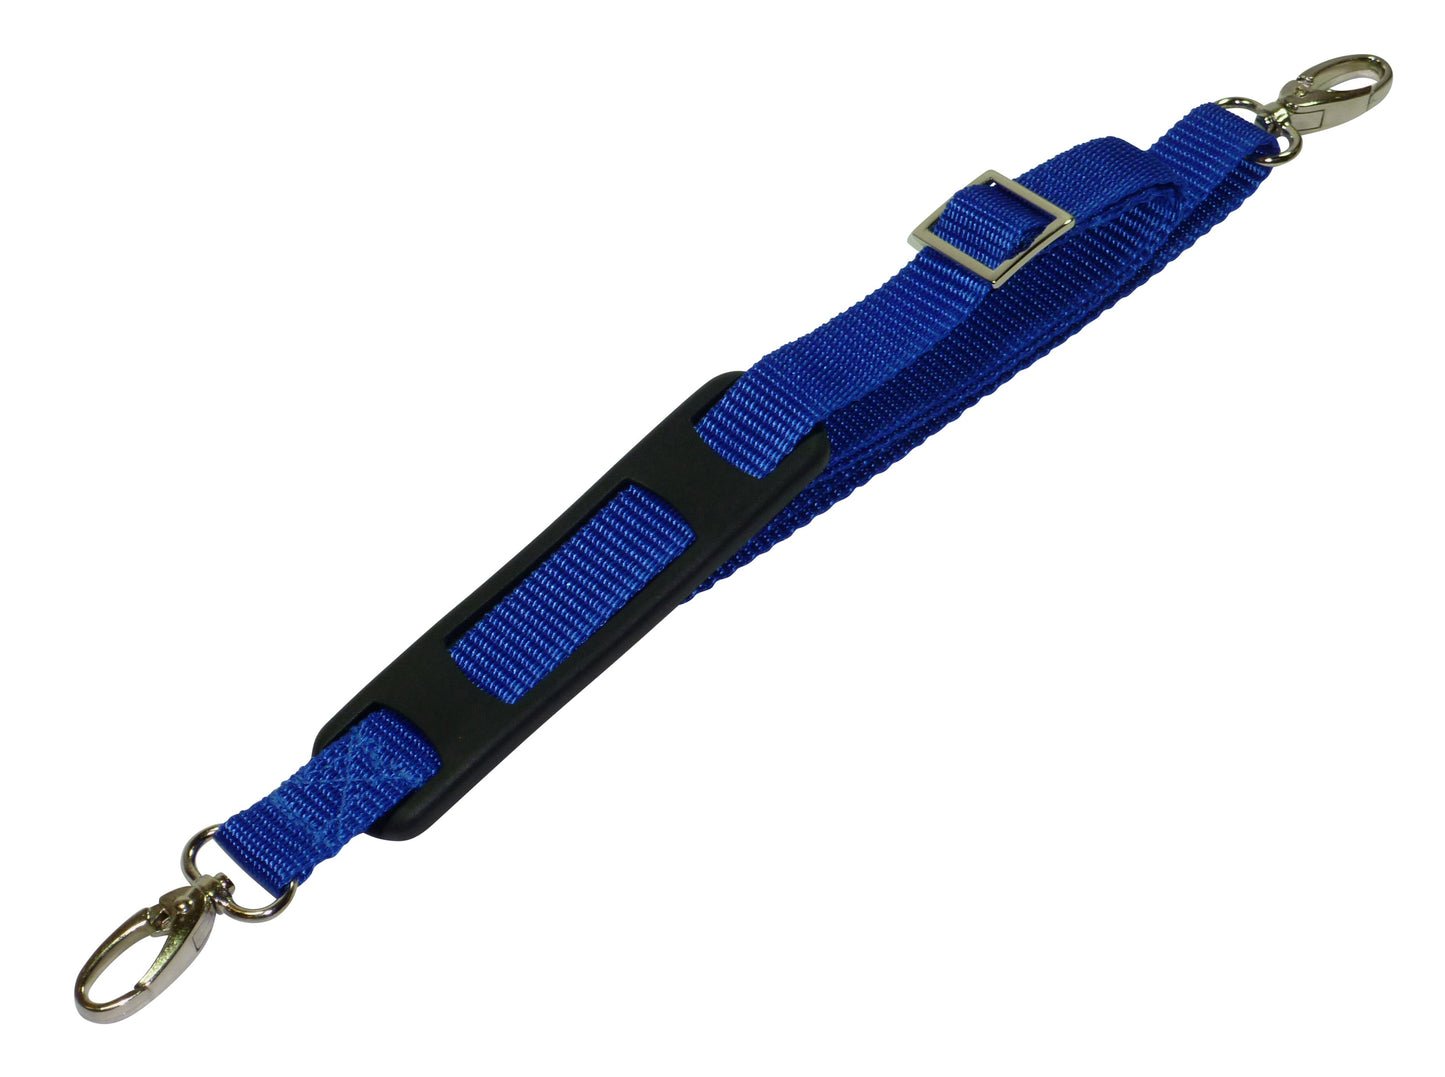 Benristraps 20mm Bag Strap with Metal Buckles and Shoulder Pad, 1 Metre in blue